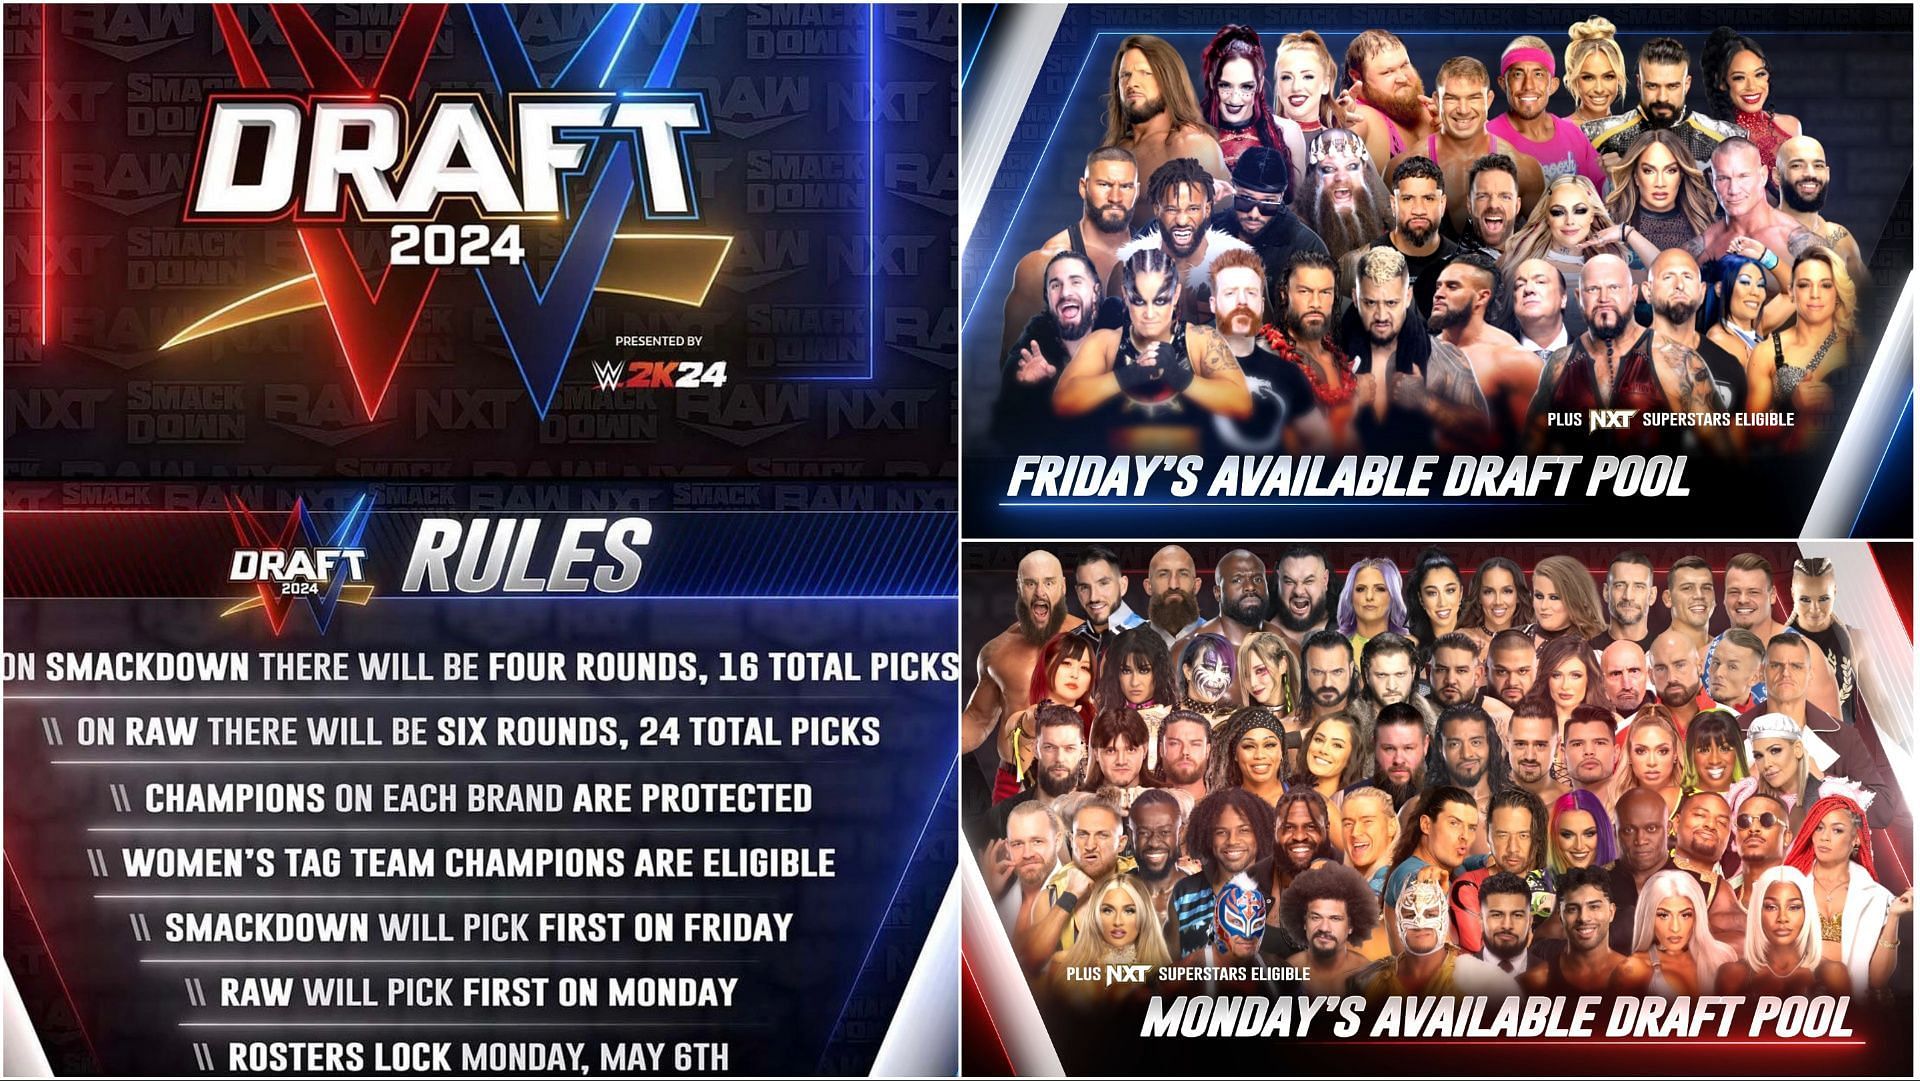 The official 2024 WWE Draft rules and talent pools